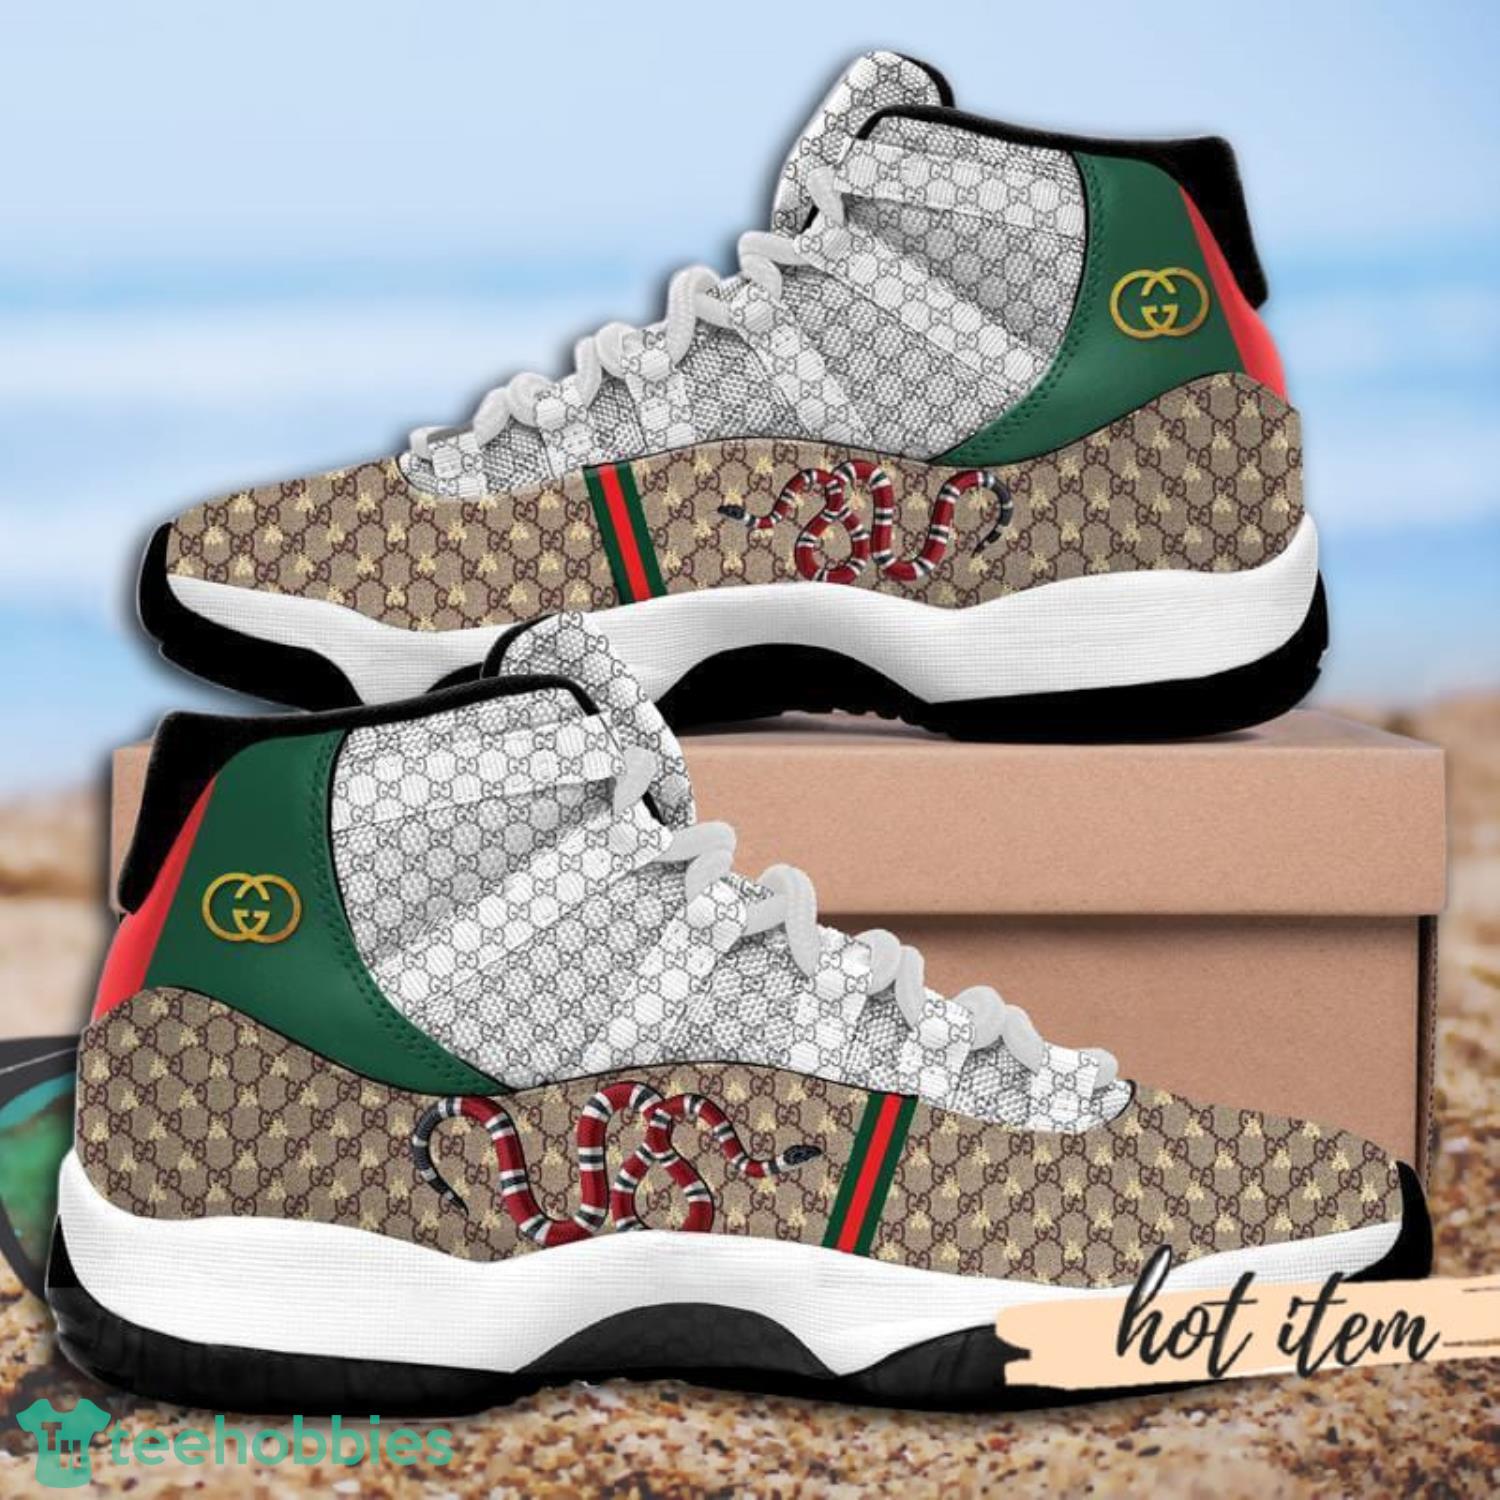 NEW FASHION] Gucci Brand Snake Air Jordan 11 Shoes Gucci Sneakers Gifts For  Men Women